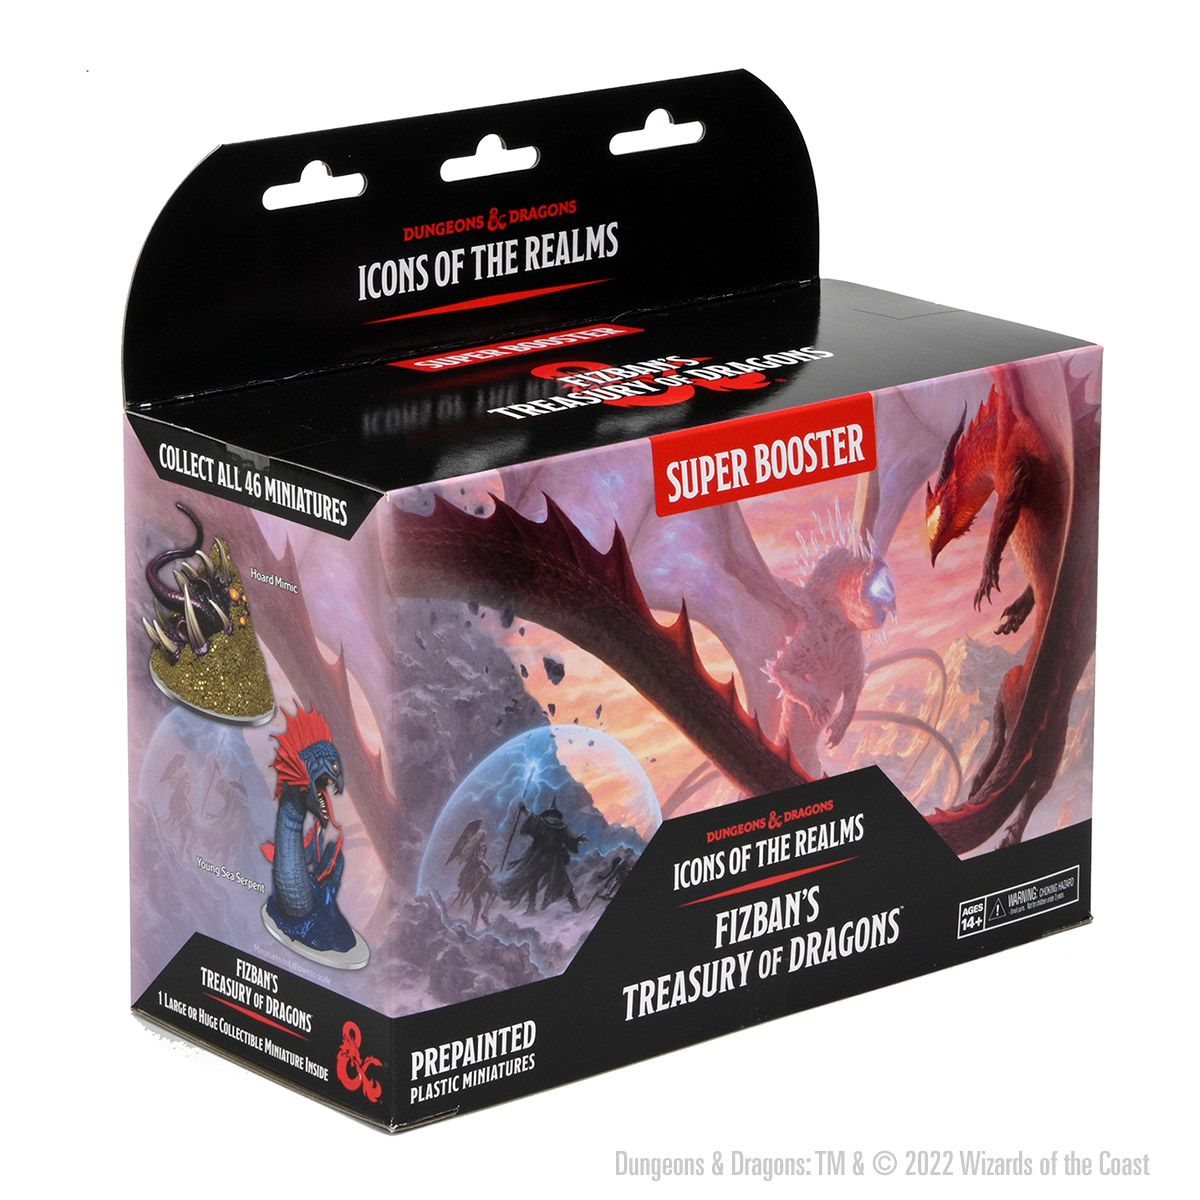 Dungeons & Dragons Icons of the Realms Miniatures: Fizban's Treasury of Dragons - Super Booster Pack